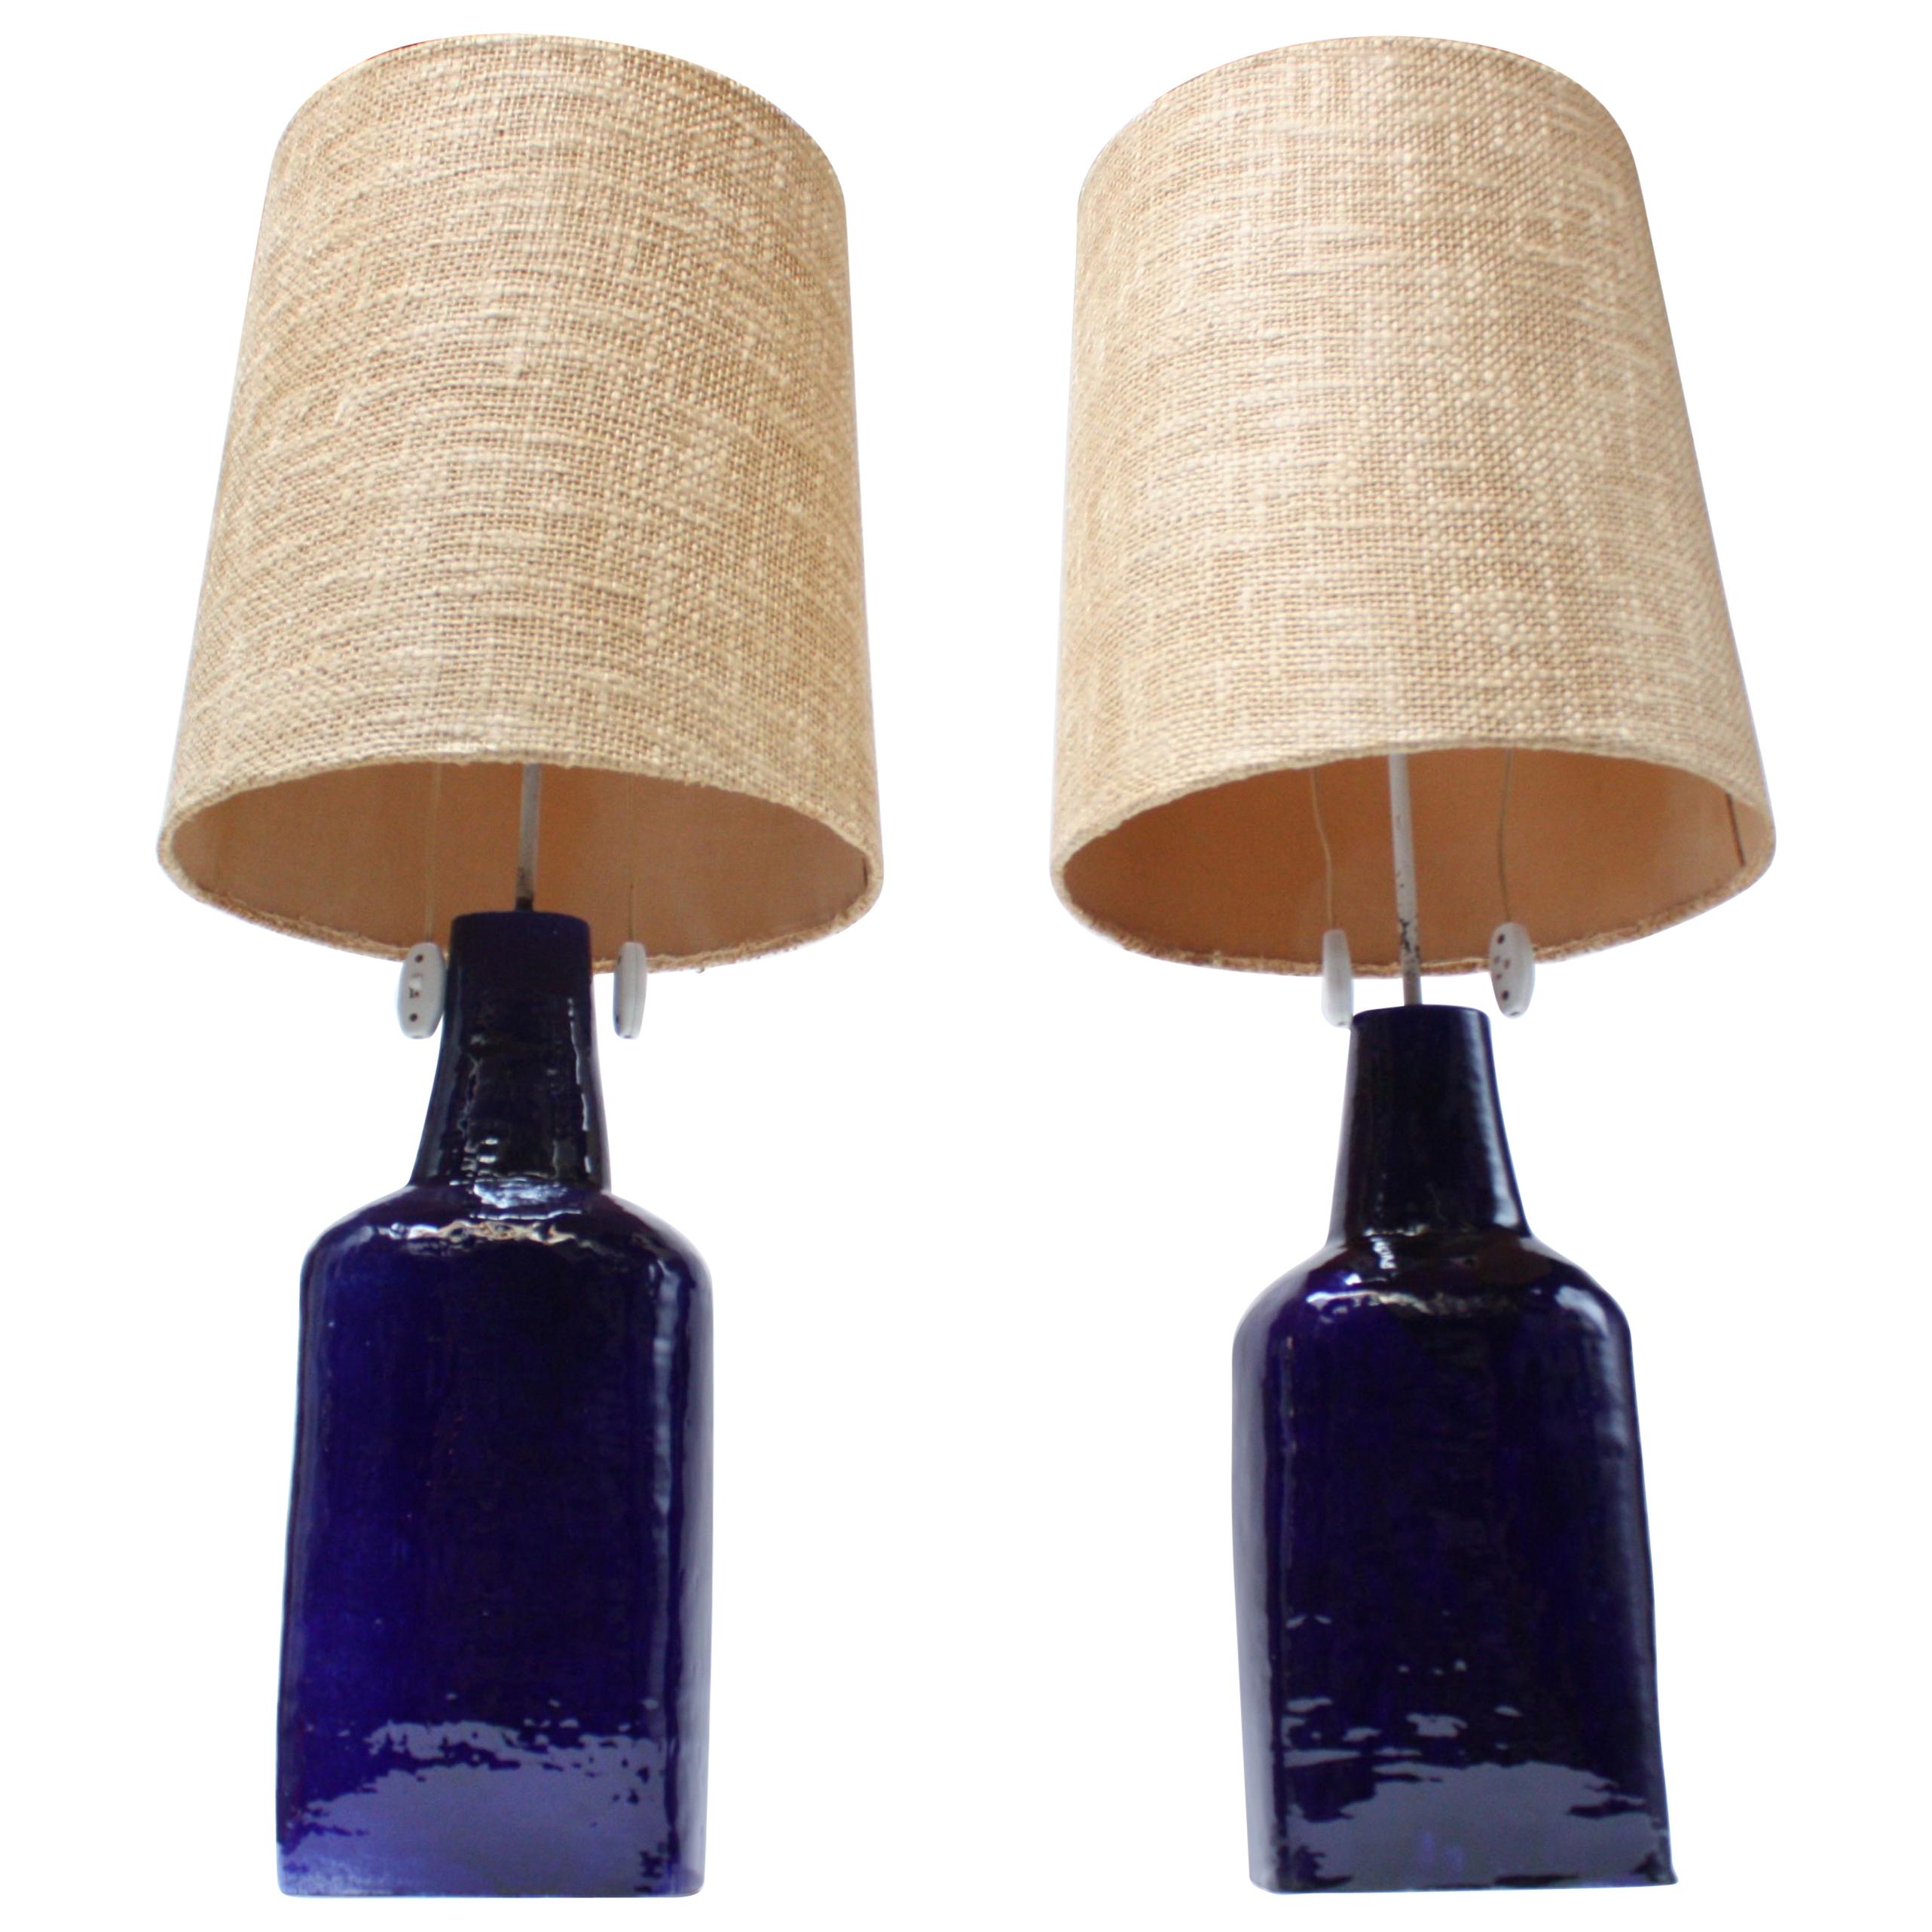 Pair of Mid-Century Swiss Oversized Ceramic Table Lamps by Mattli